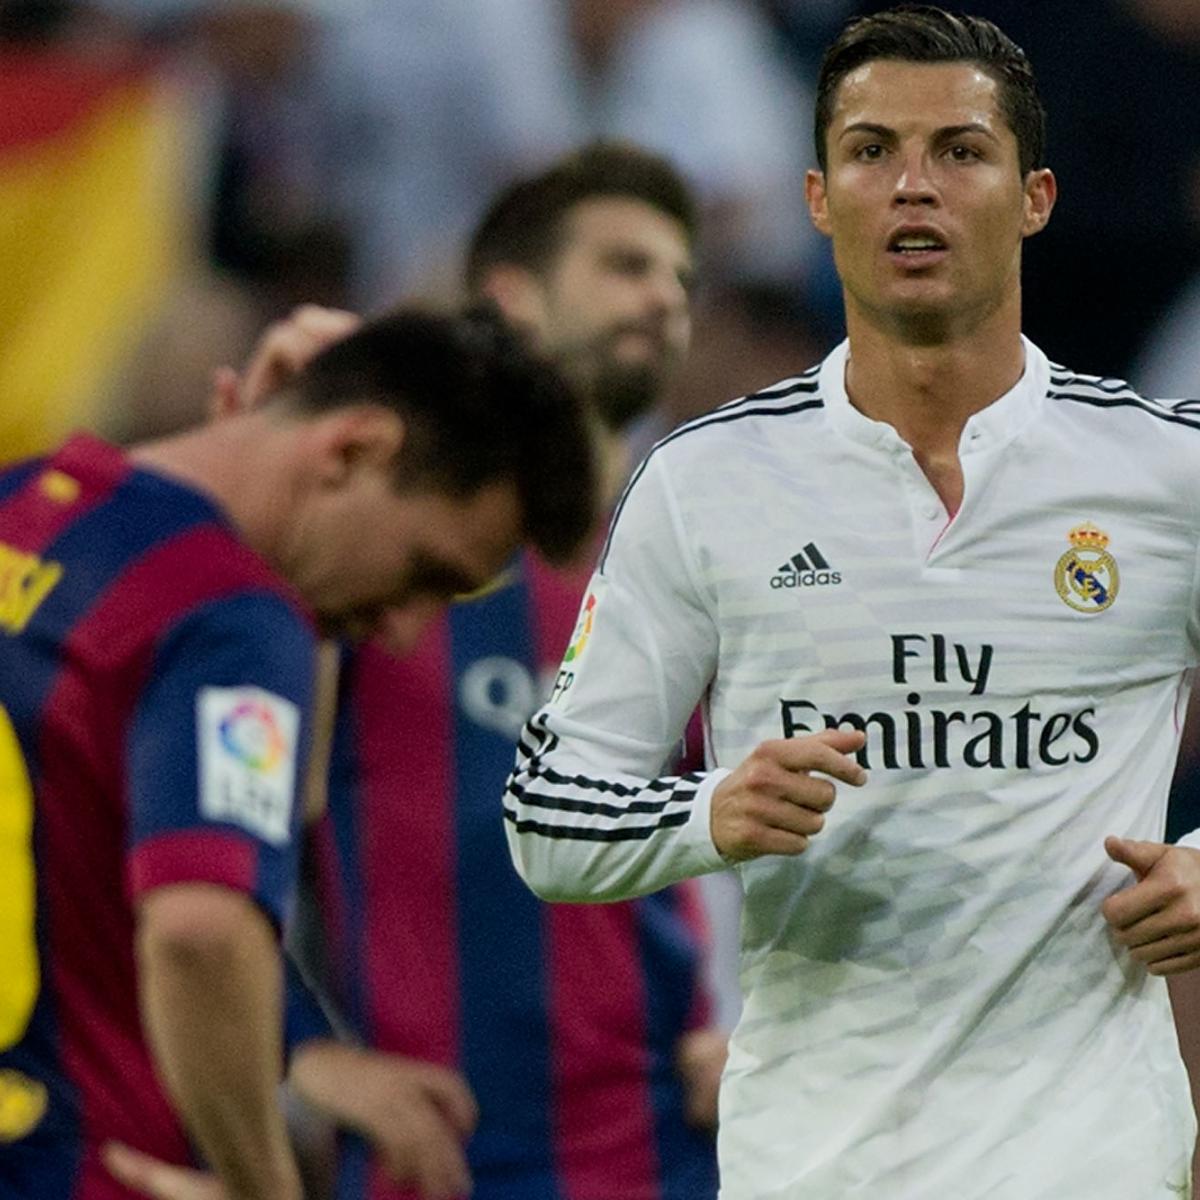 Messi or Ronaldo - who is truly the best? - The Perspective